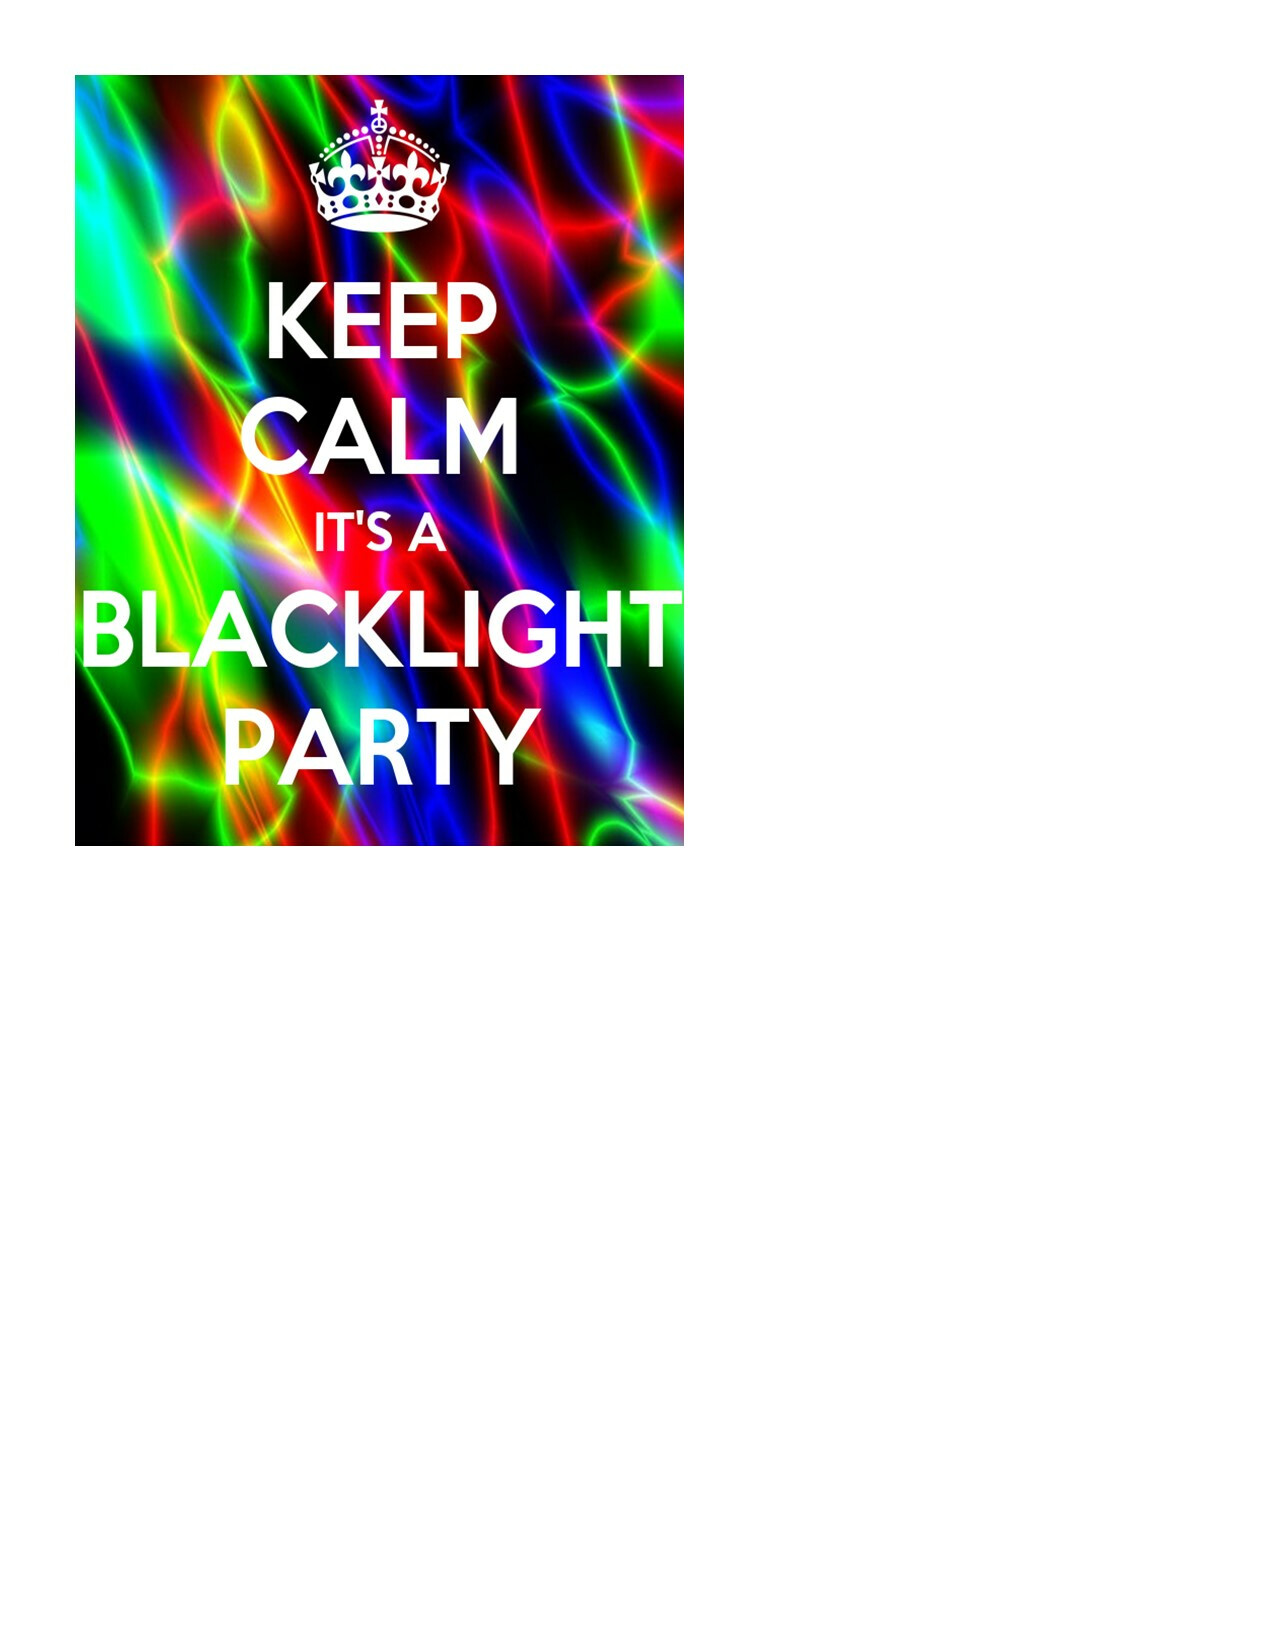 AMPLIFY!! Blacklight Costume Party!!